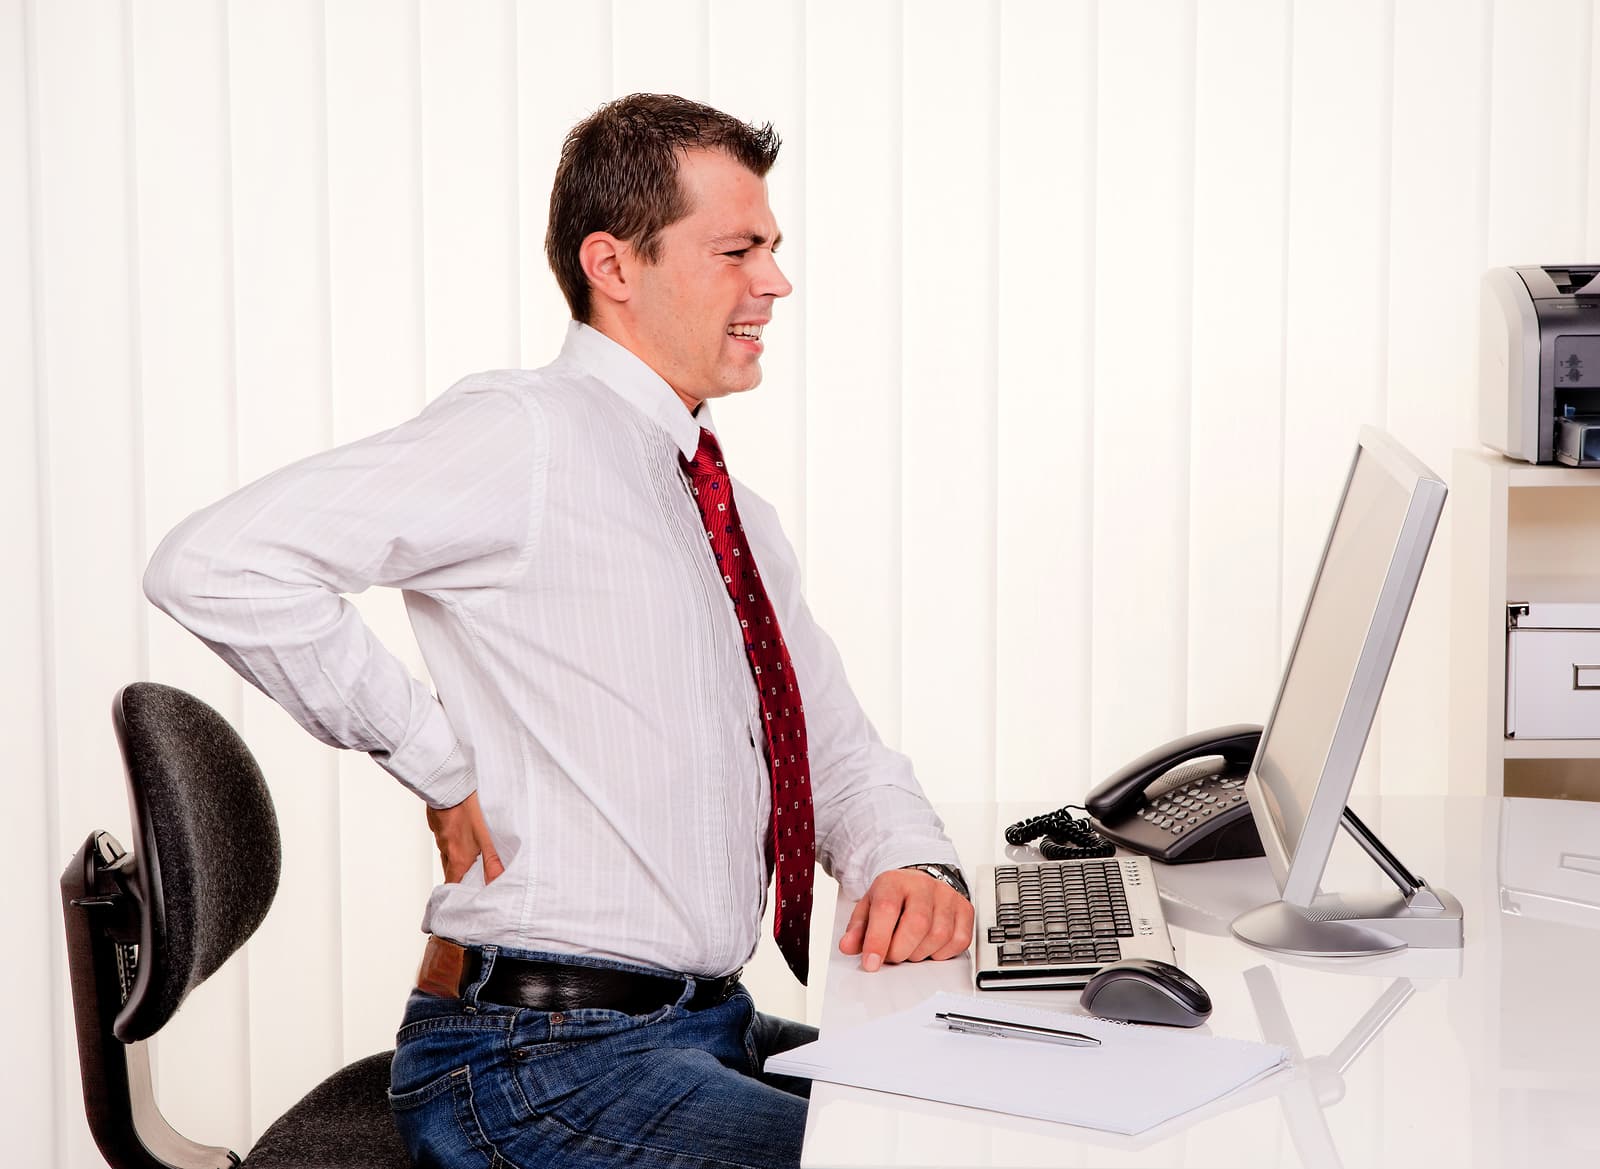 7 Top Causes of Back Pain That Can Hurt